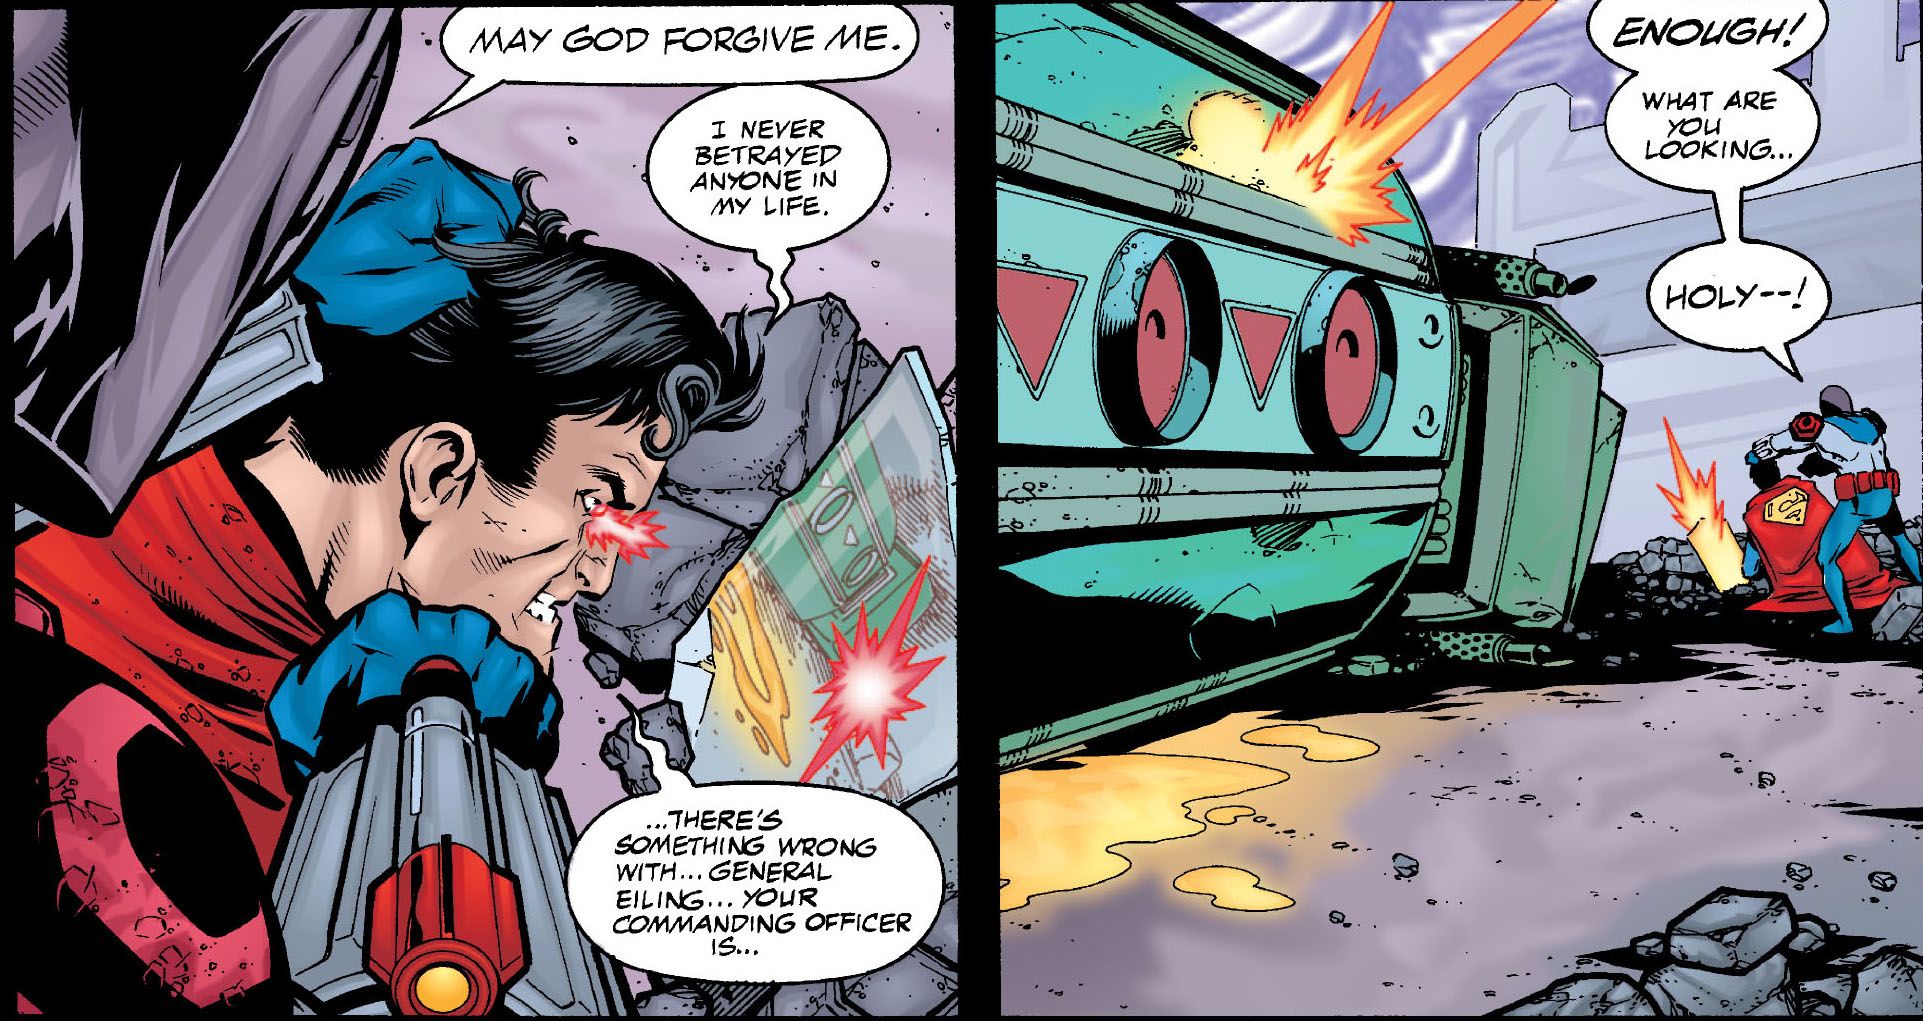 Superman uses invisible heat vision in JLA v1-25